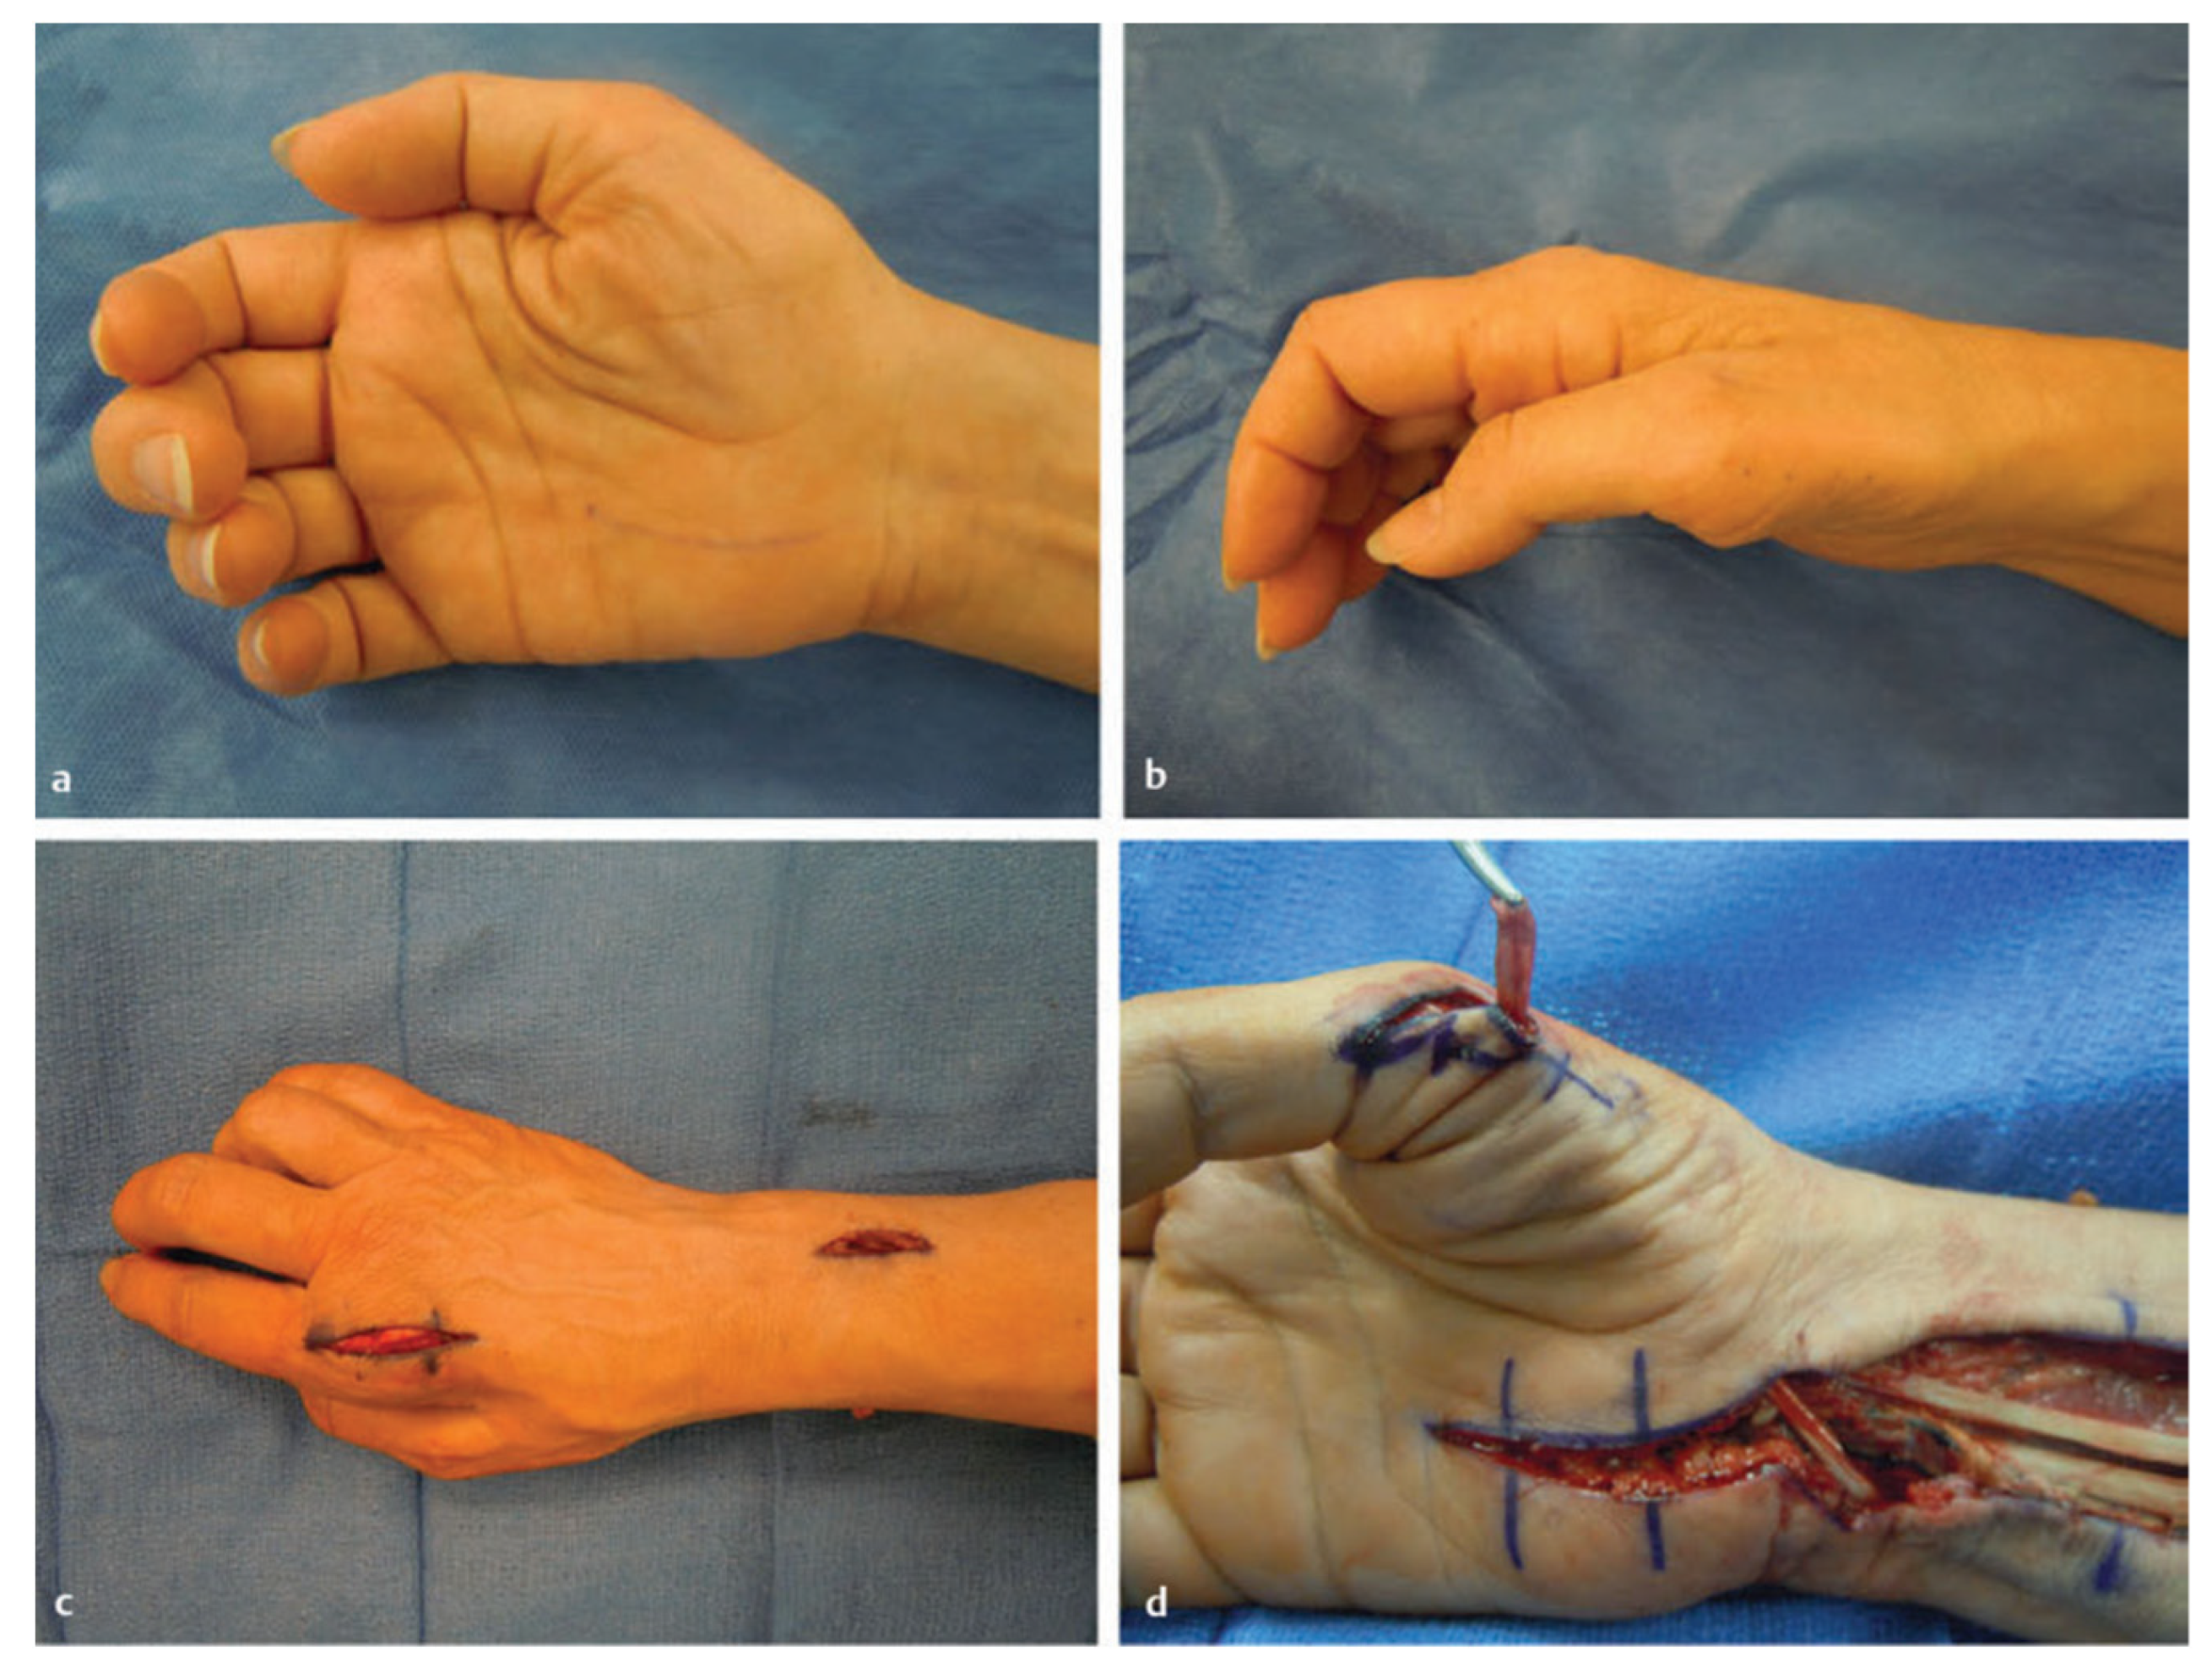 JCM | Free Full-Text | Revision of Carpal Tunnel Surgery